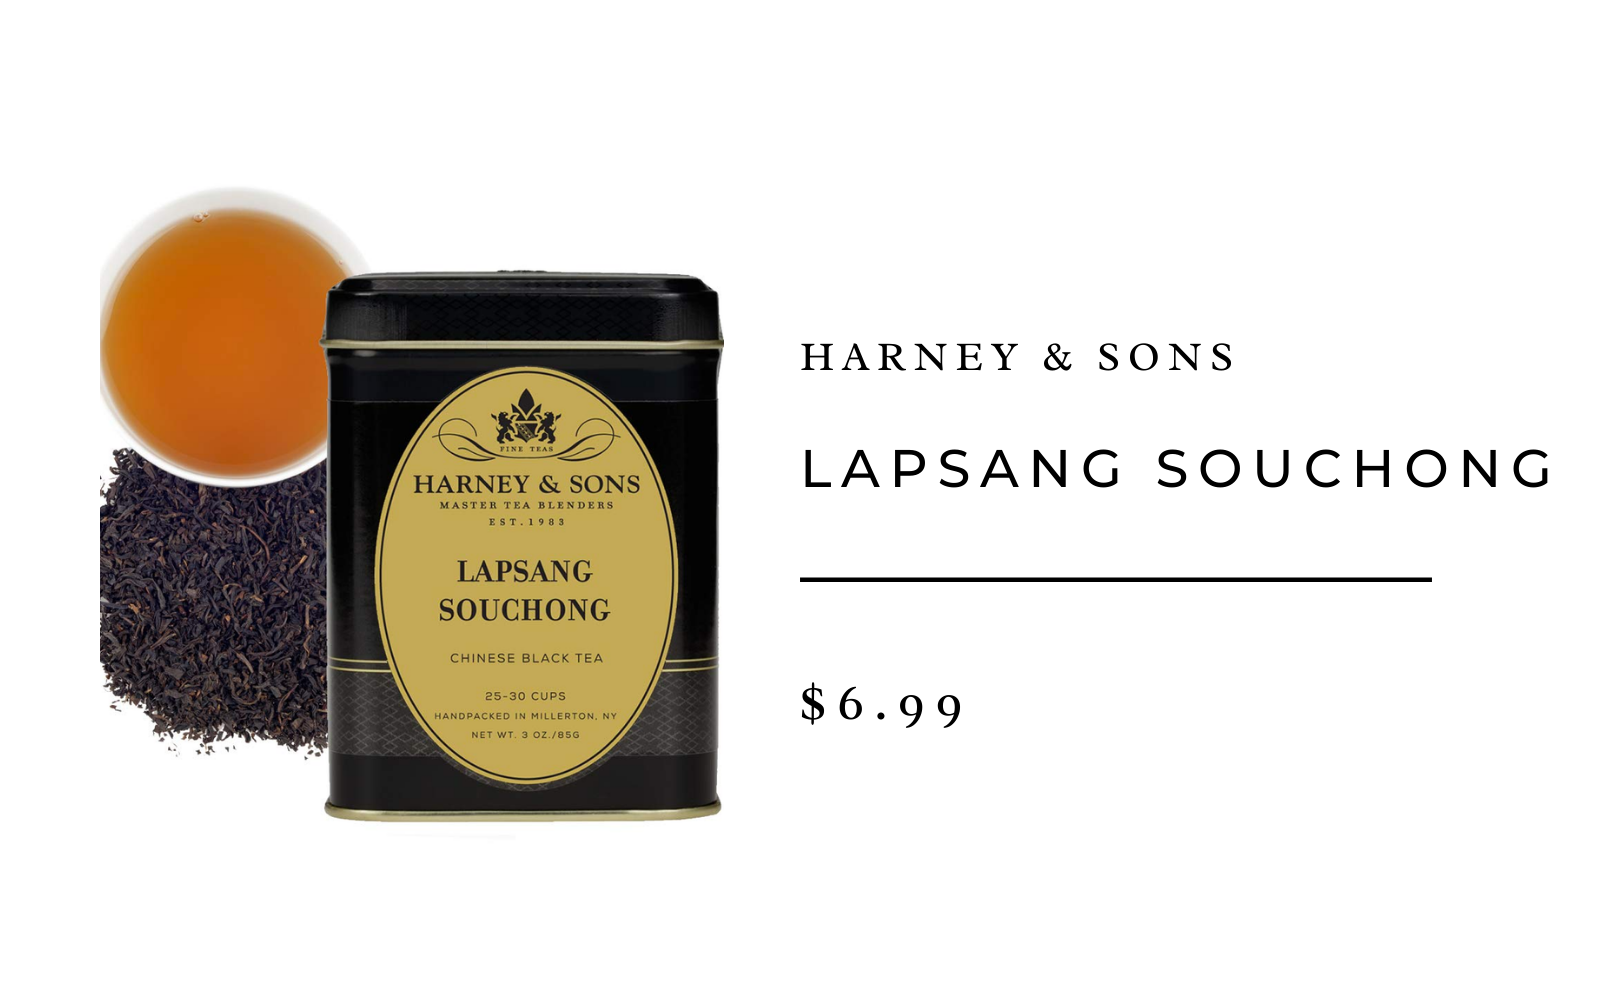 harney & sons lapsang souchong